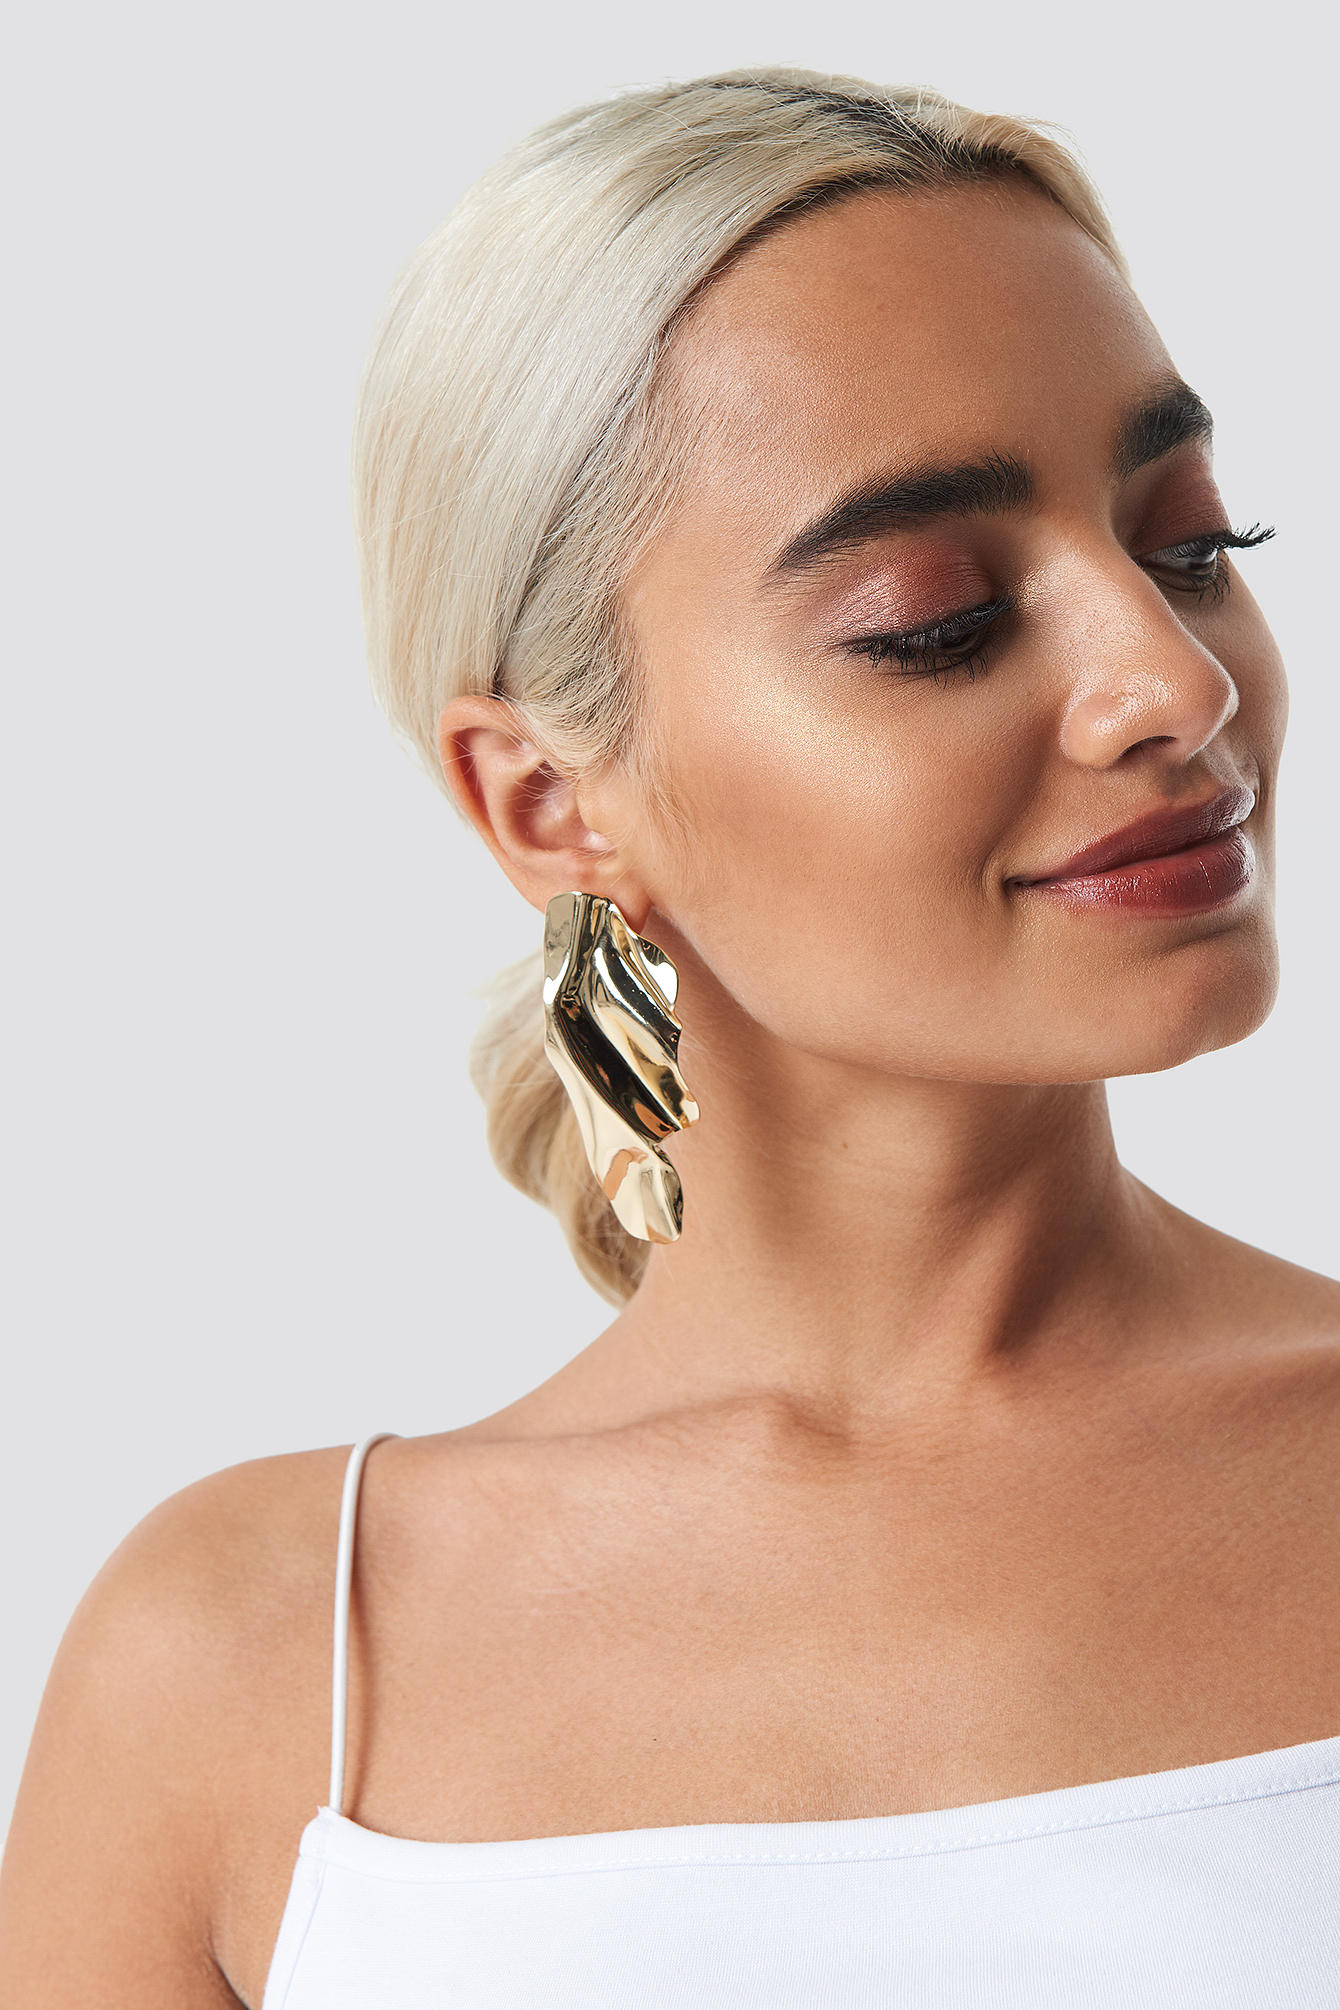 Na-kd Accessories Wrinkled Triangular Earrings - Gold Https://www.na-kd.com/poqcolorimages/gold.png